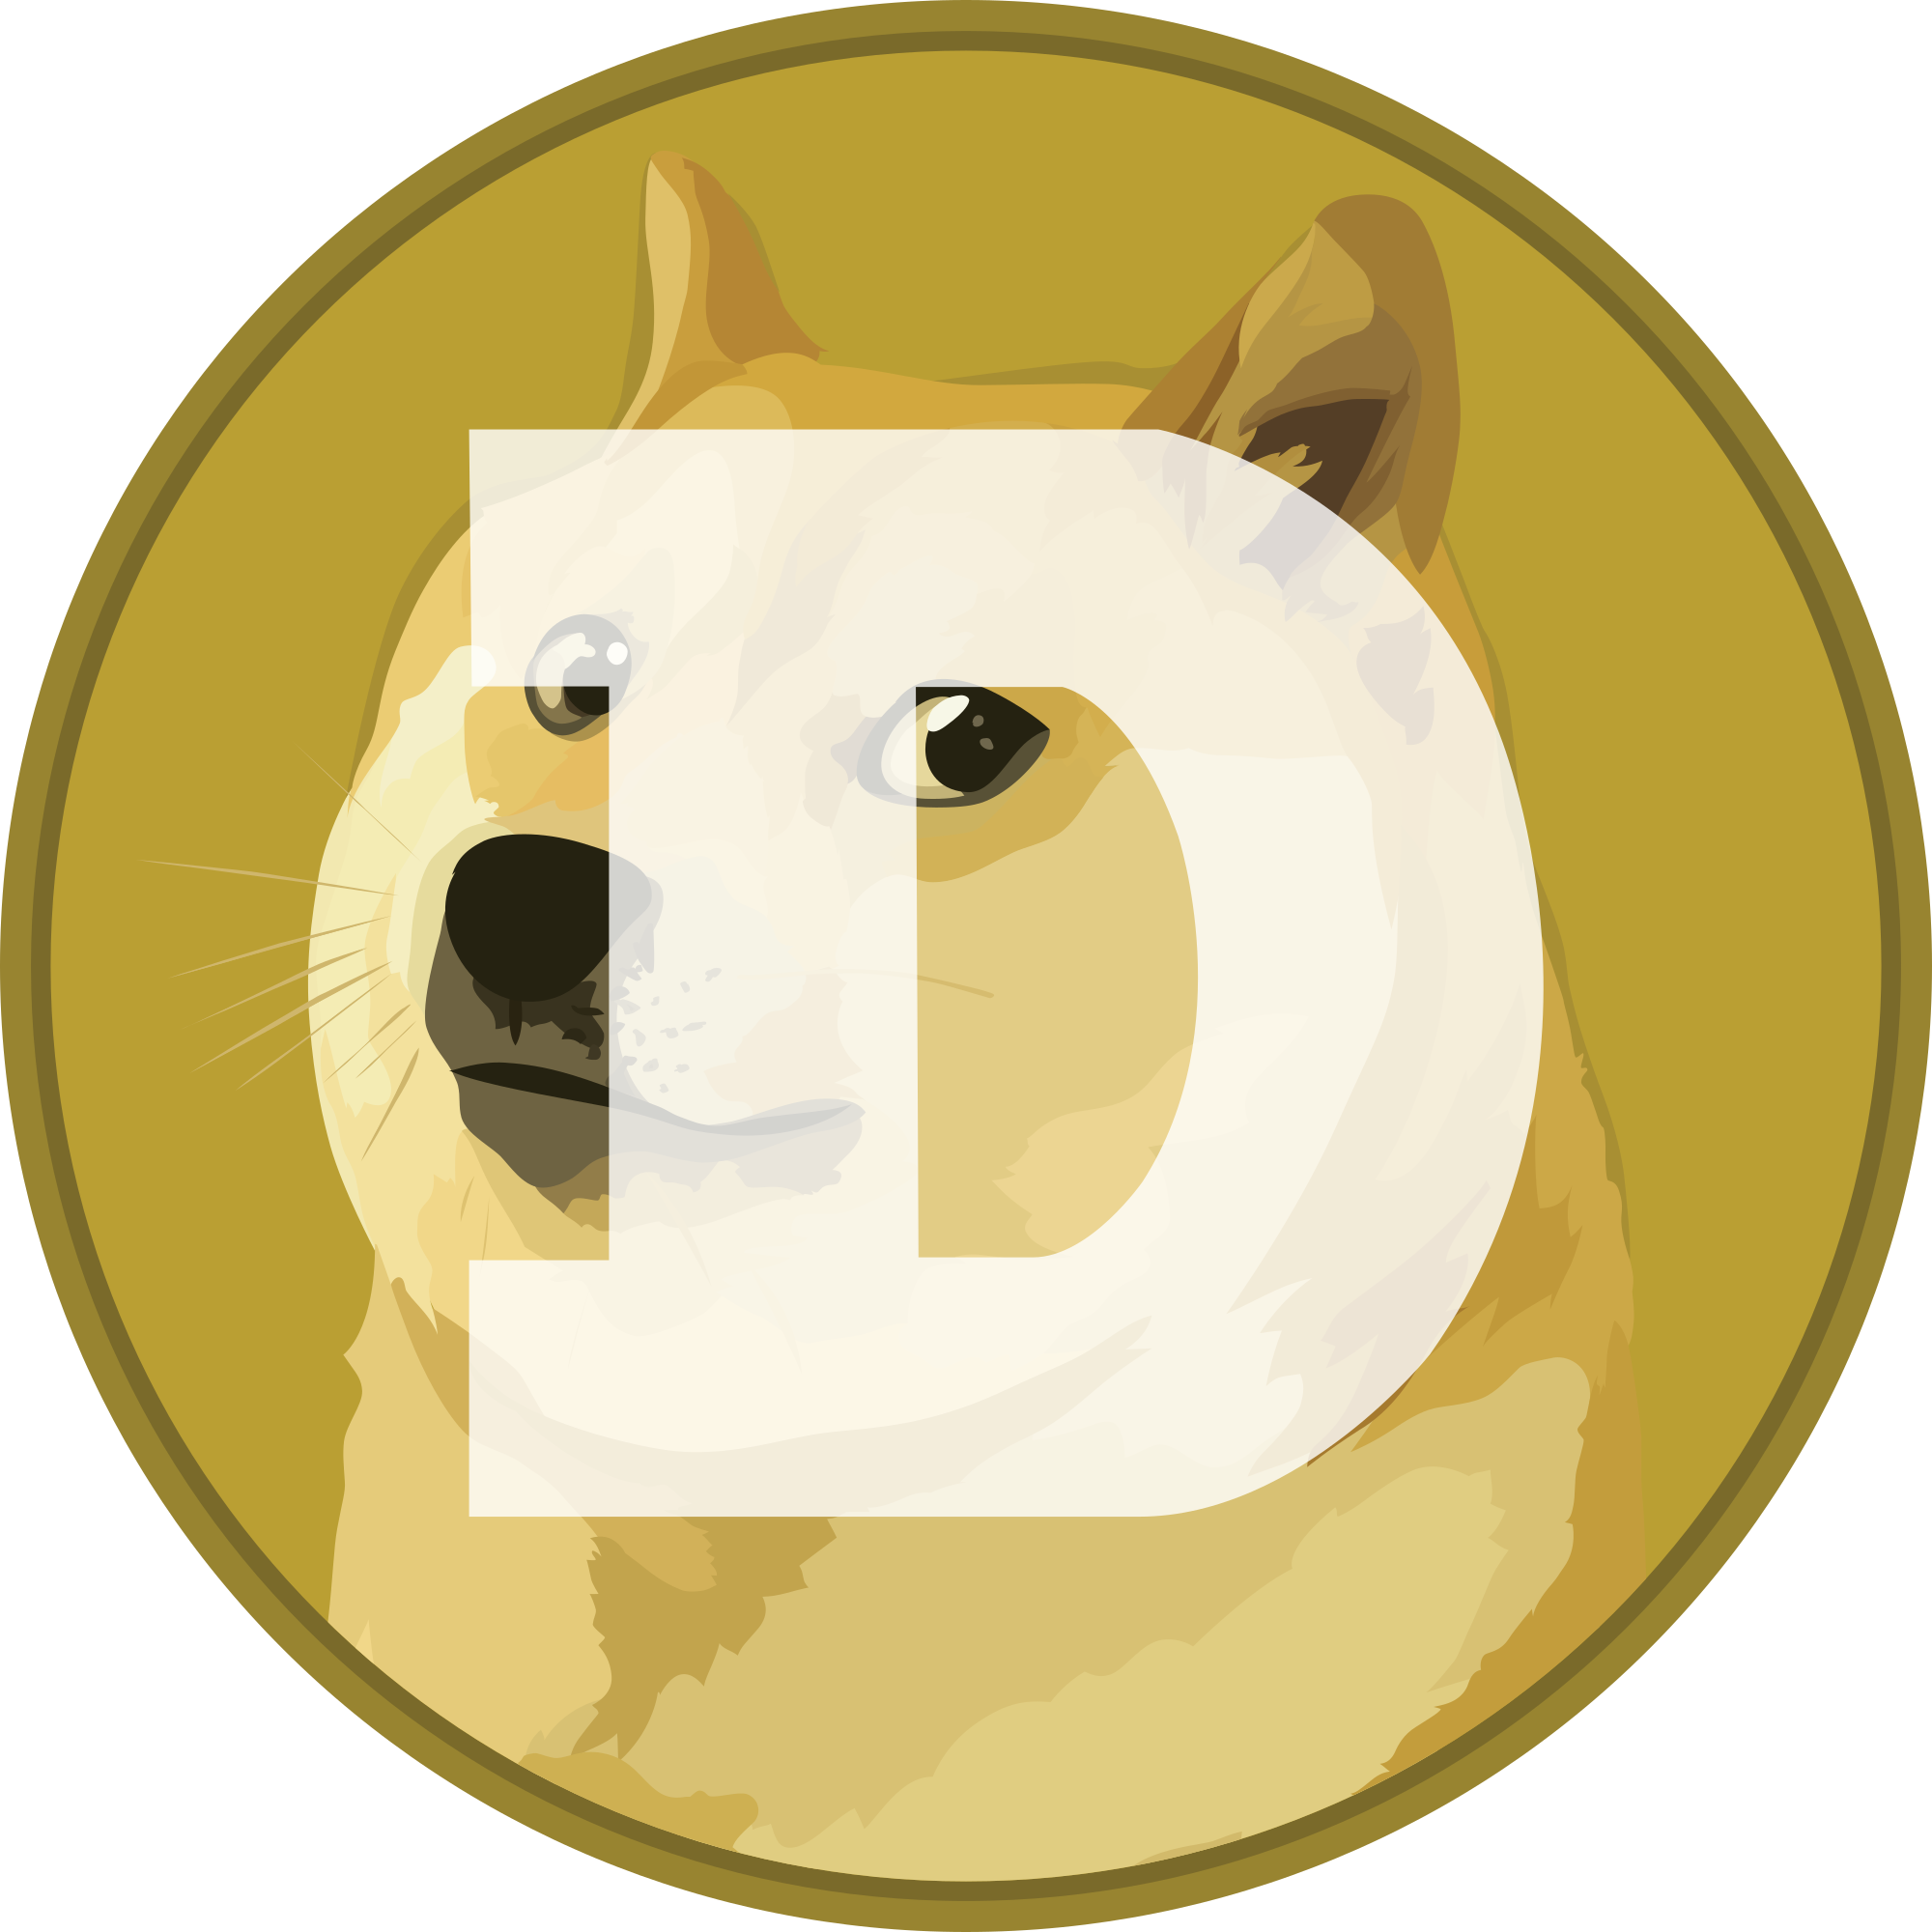 doge coin watch